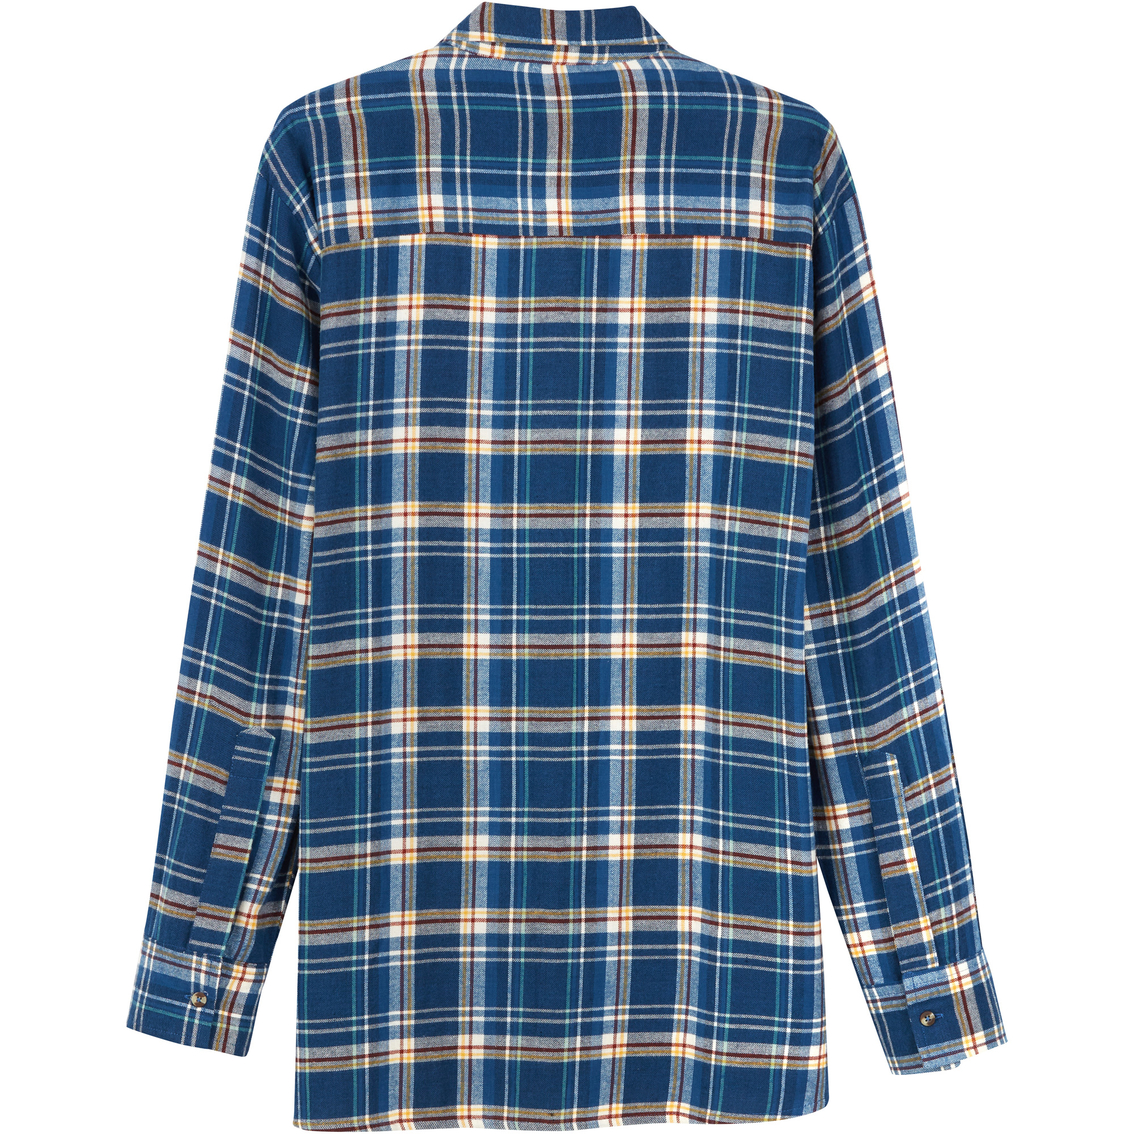 Junction West Flannel Woven Shirt - Image 2 of 2